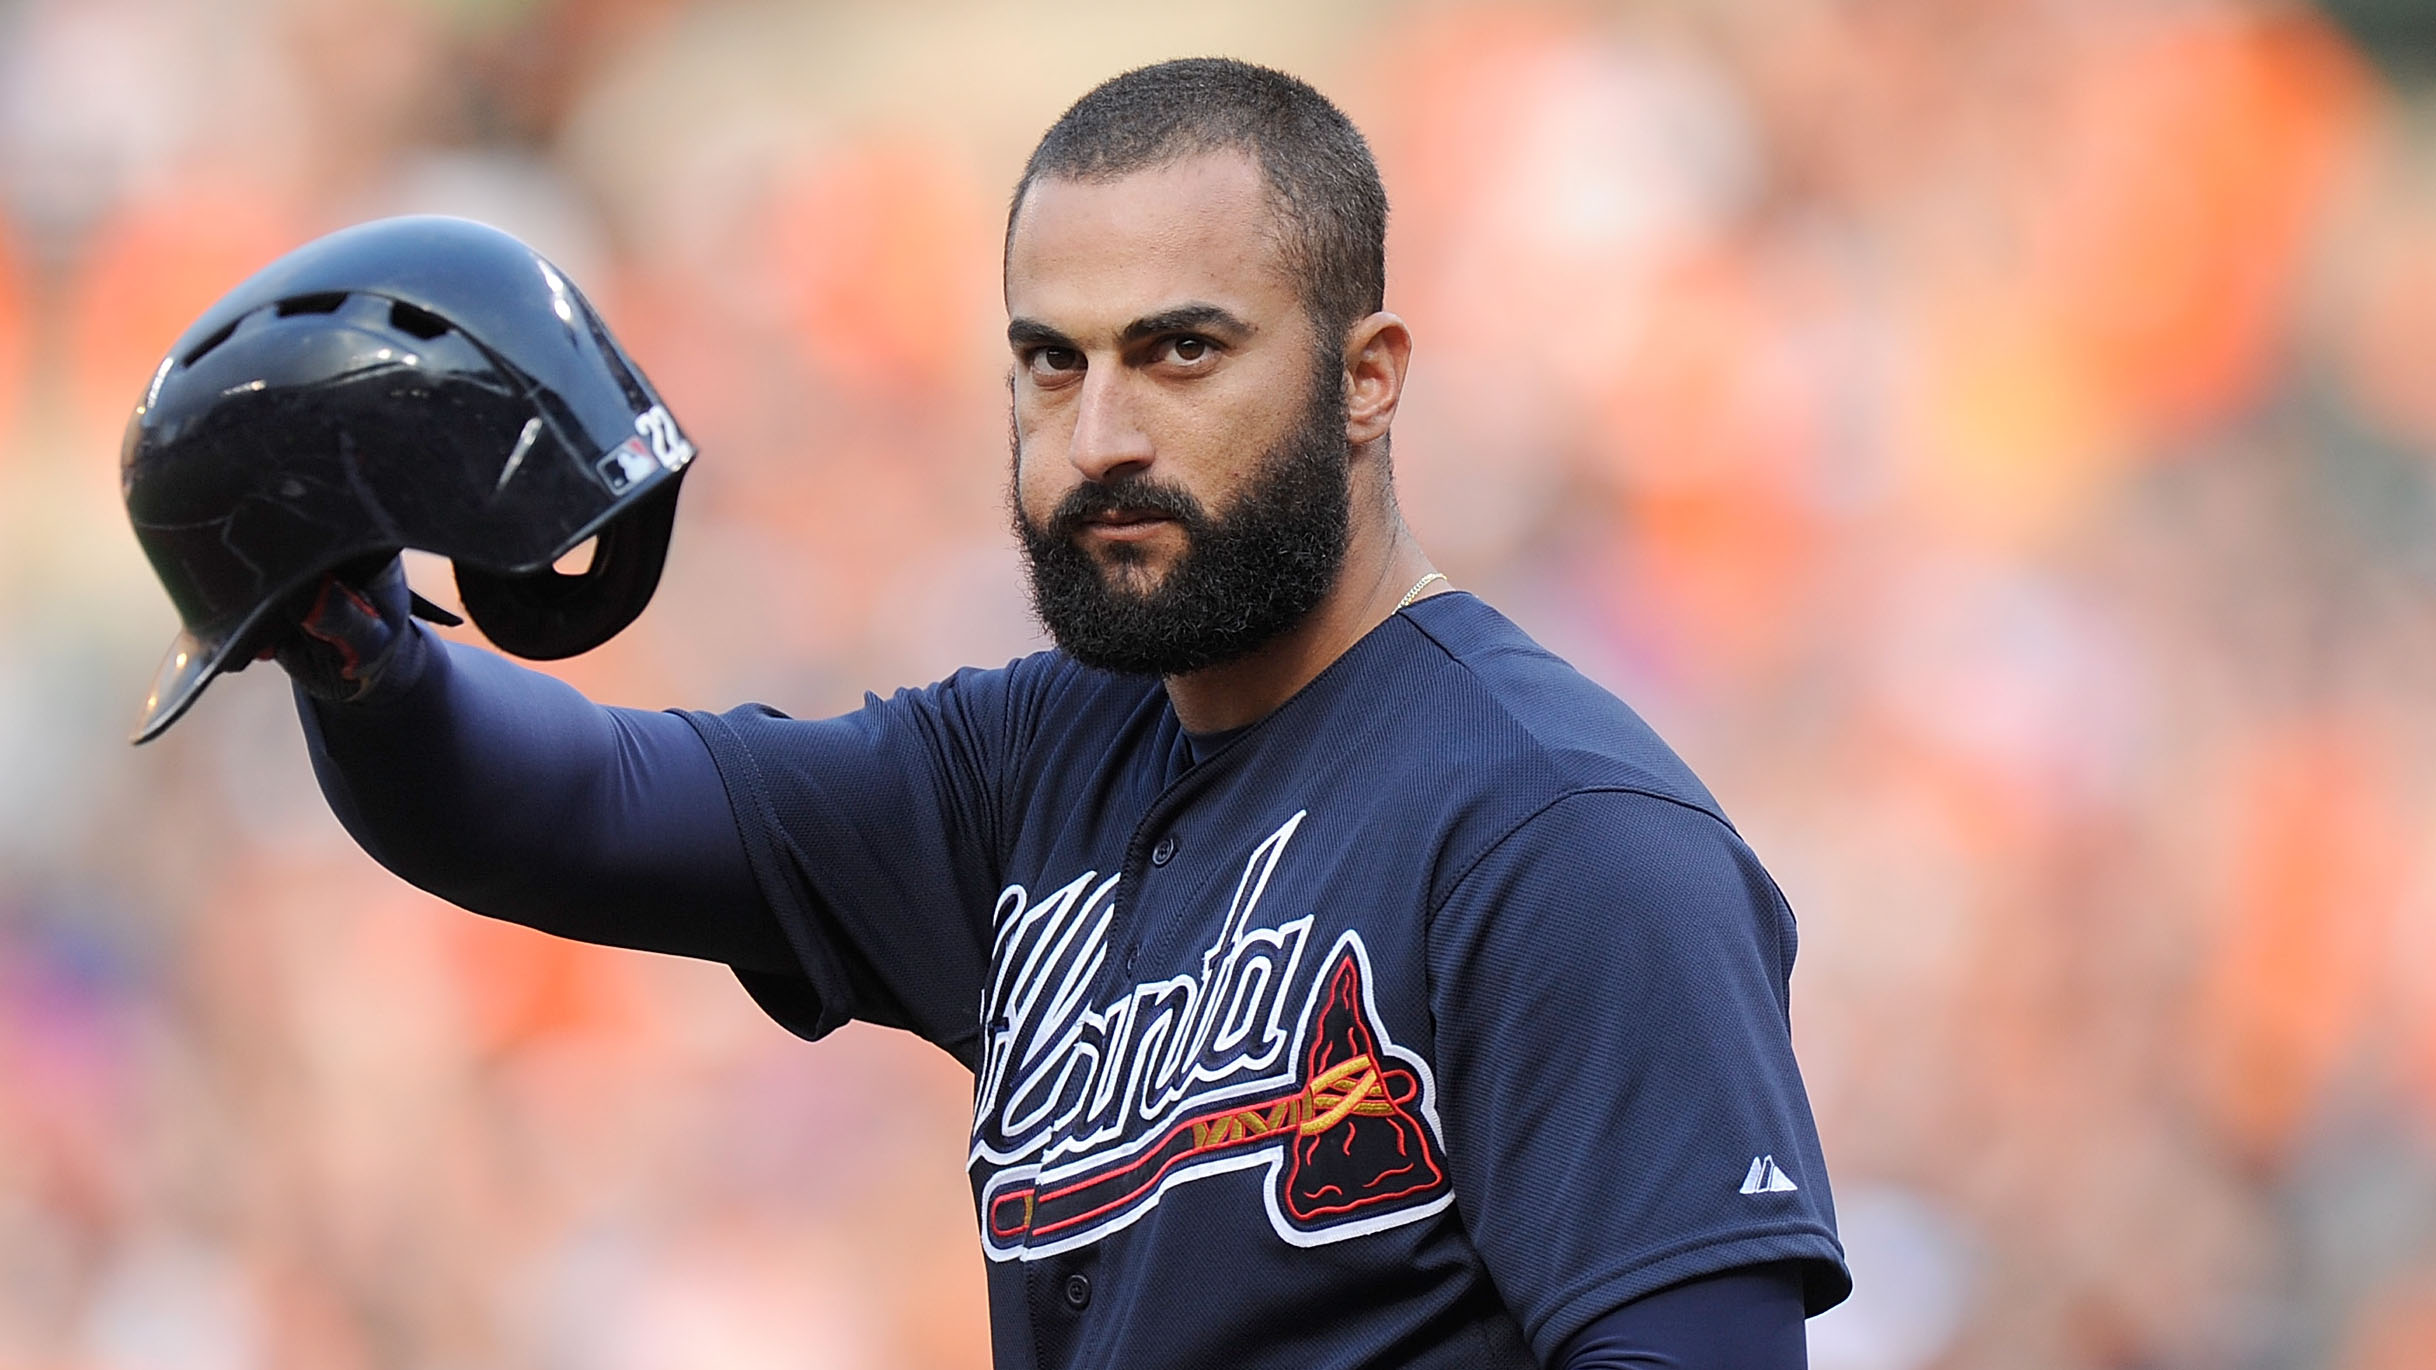 Nick Markakis has his manager's back, Braves glad both are still here